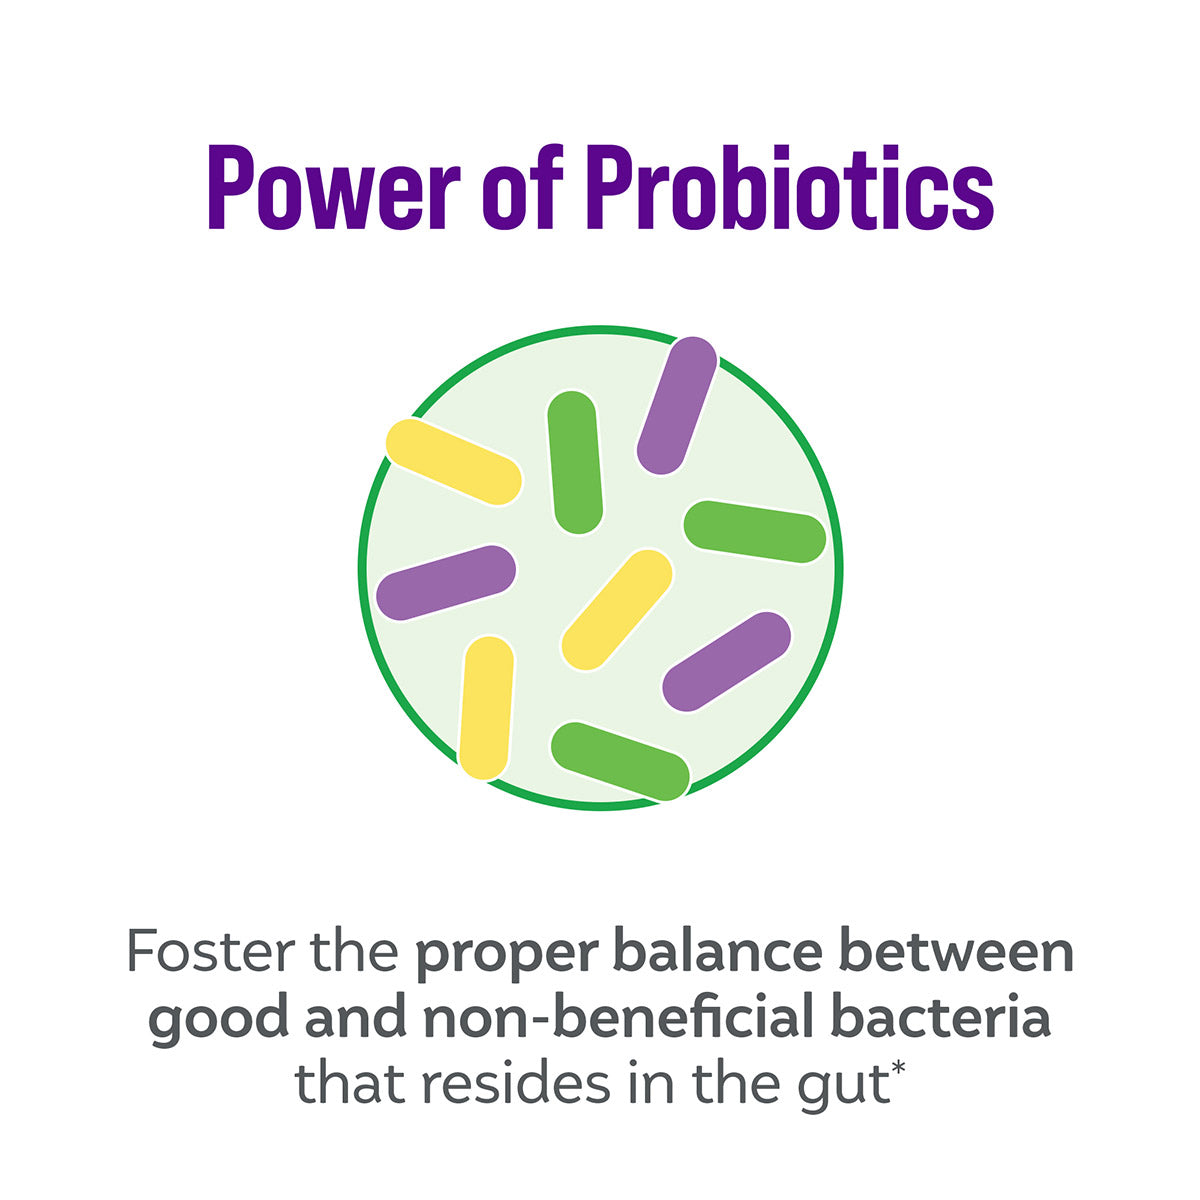 Power of pobiotics, foster the proper balance between good and non-beneficial bacteria that resides in the gut.